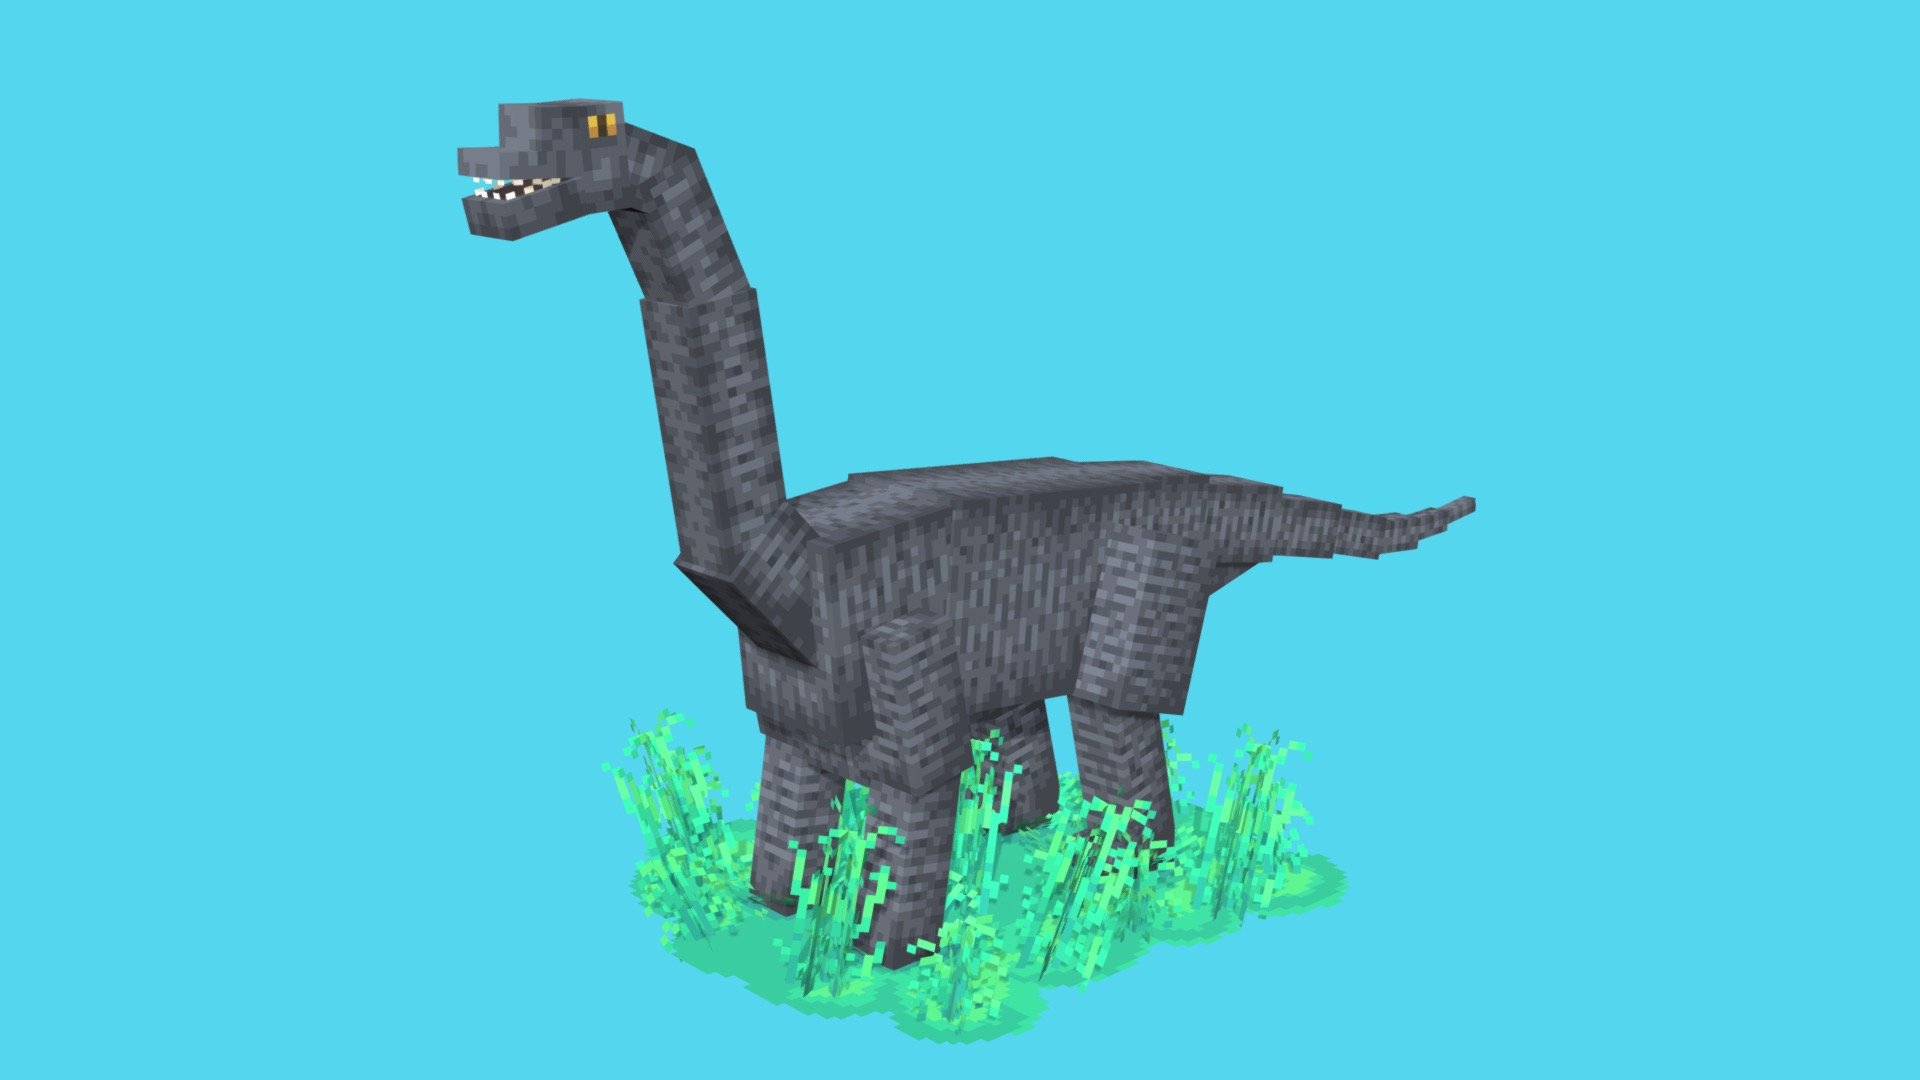 Made for Mineplex's Into the Movies map - Brachiosaurus - 3D model by MOSKA (@moska_design) 3d model